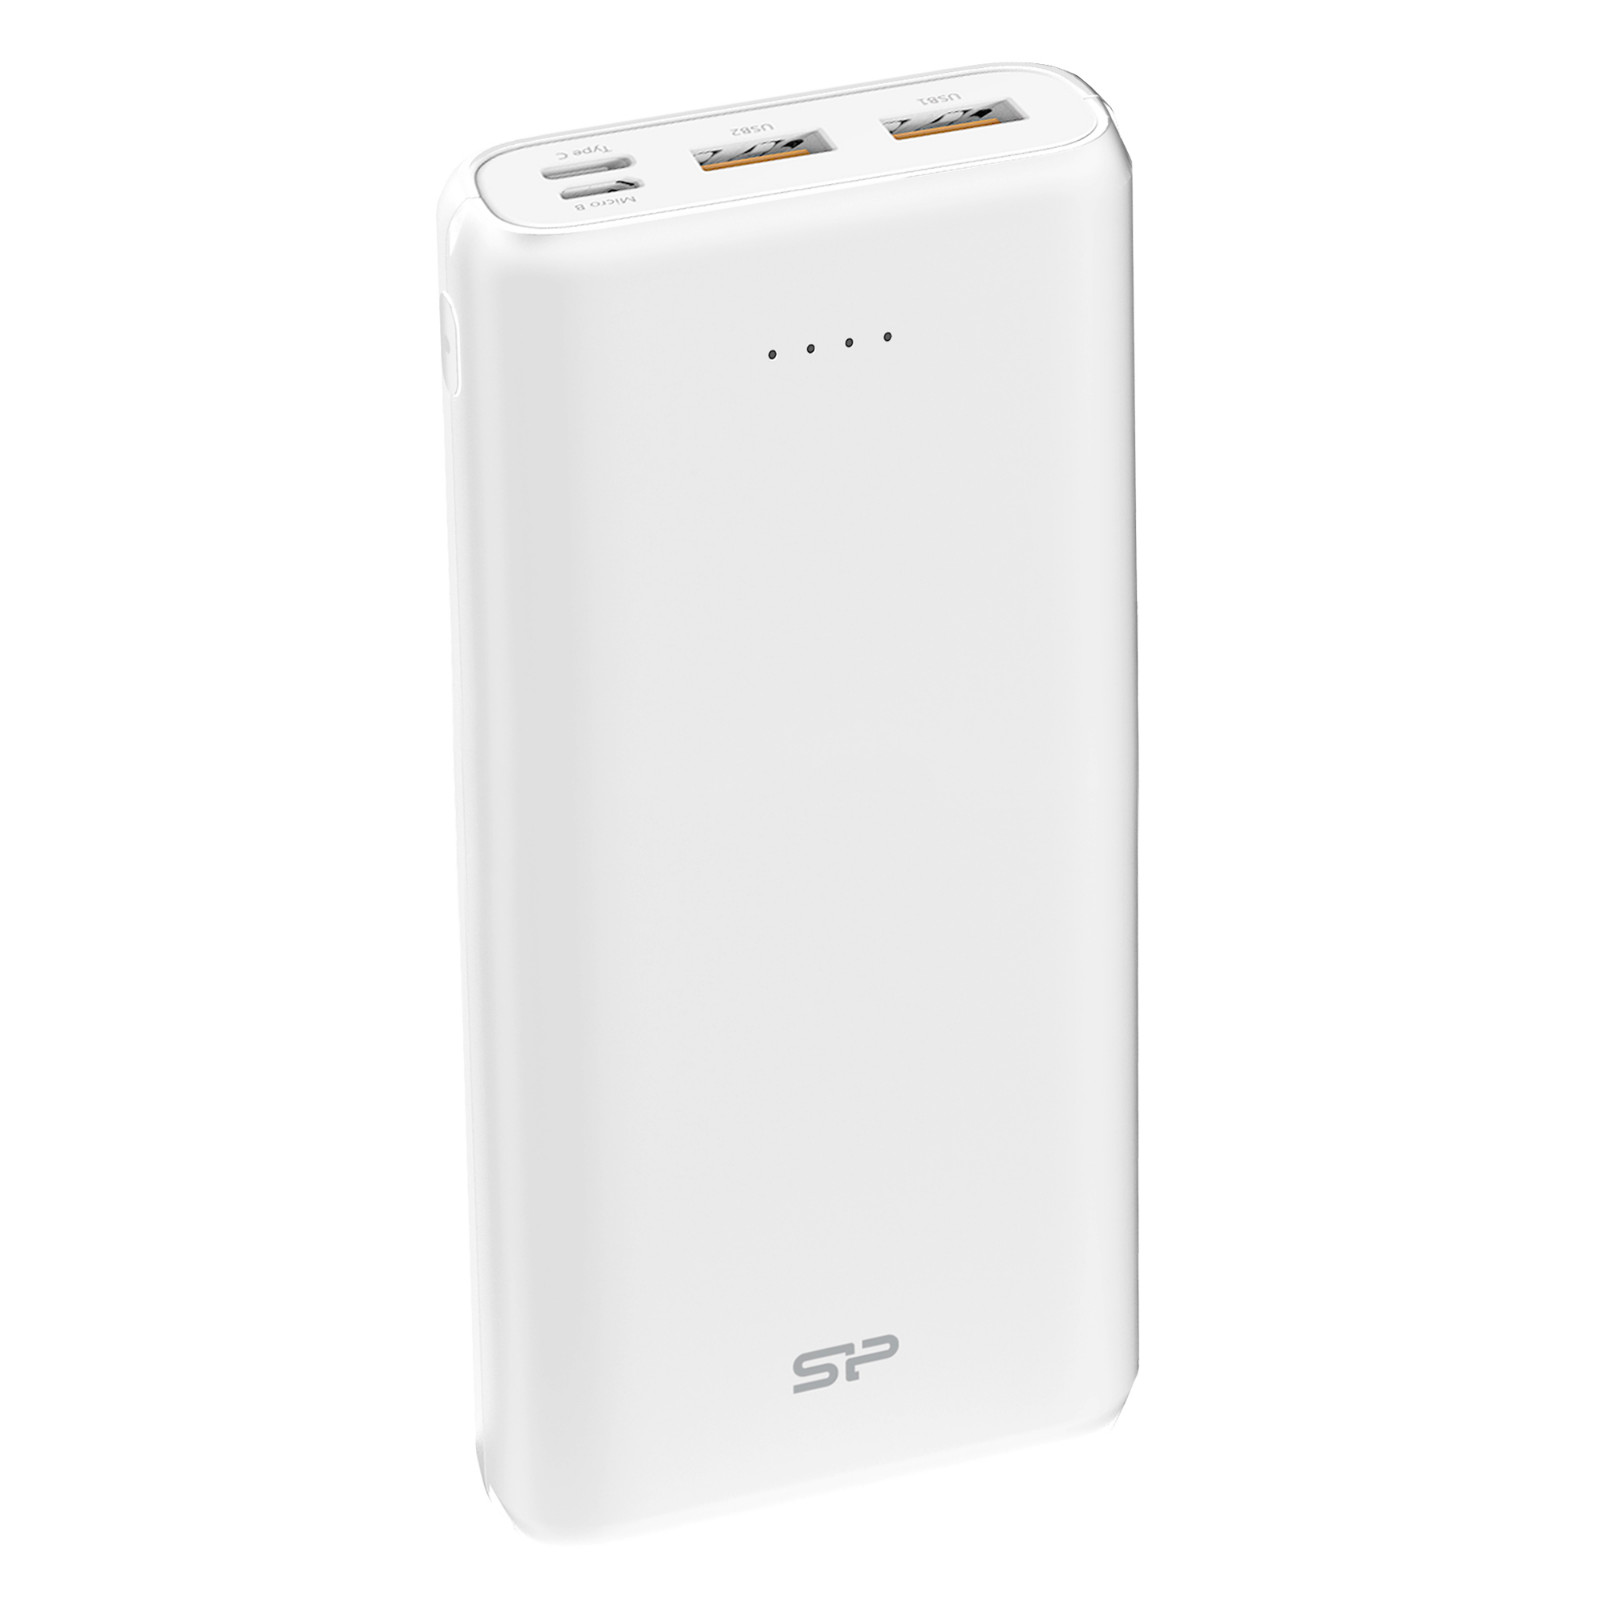 Silicon Power C20QC 20000mAh Quick Charge 3.0 USB C Powerbank Portable Charger, White